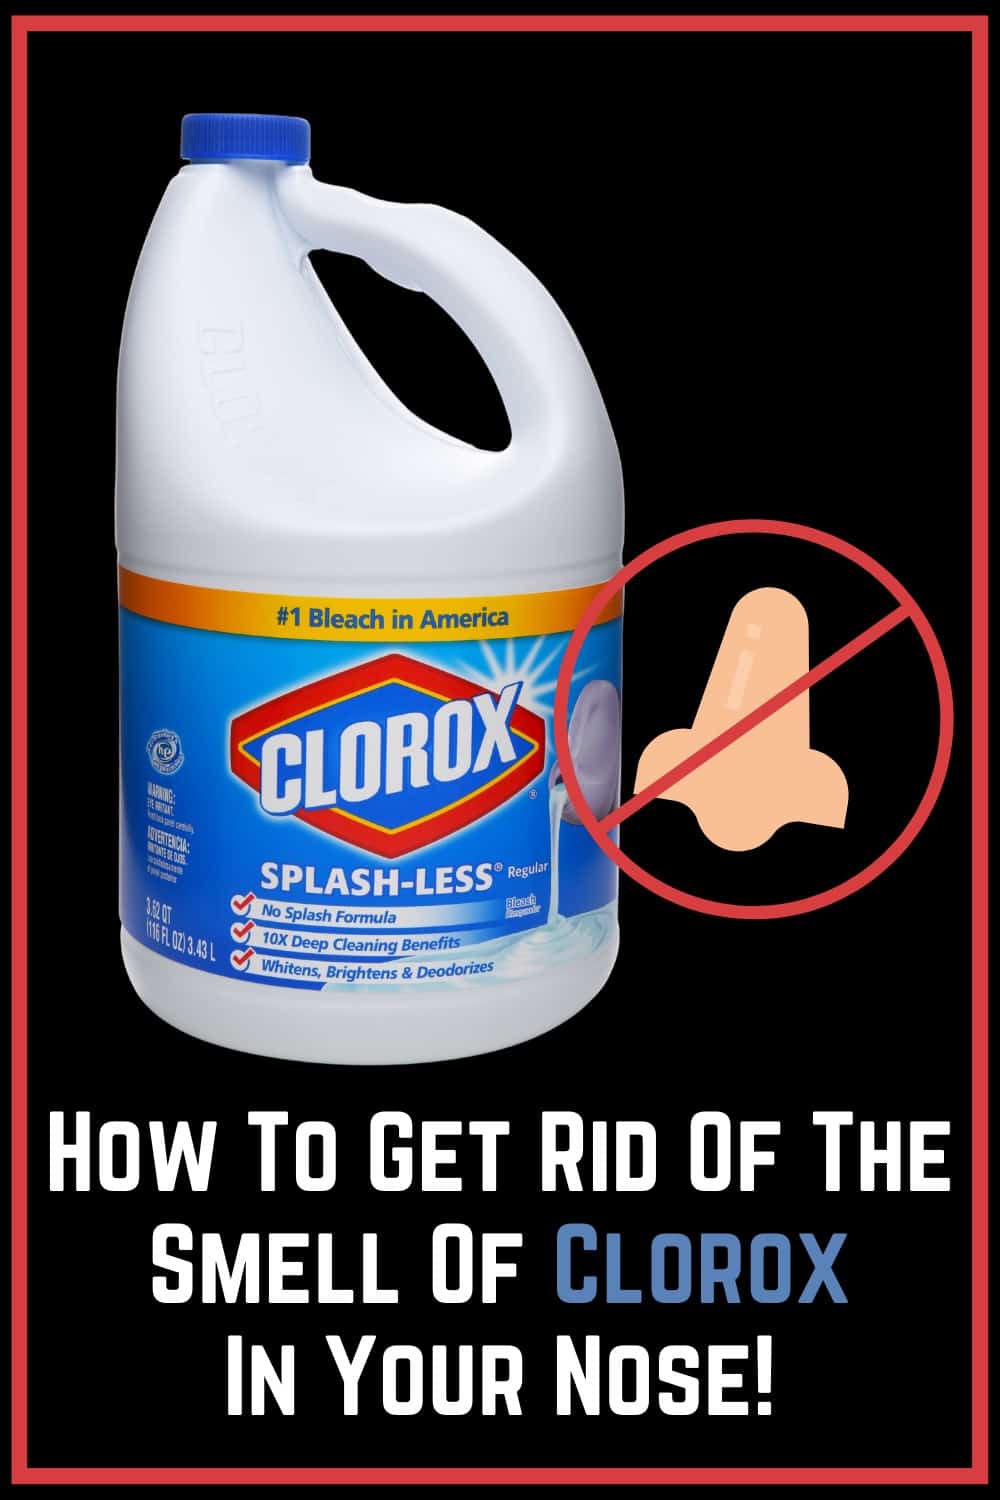 Move to a well-ventilated area to get clorox smell out of your nose